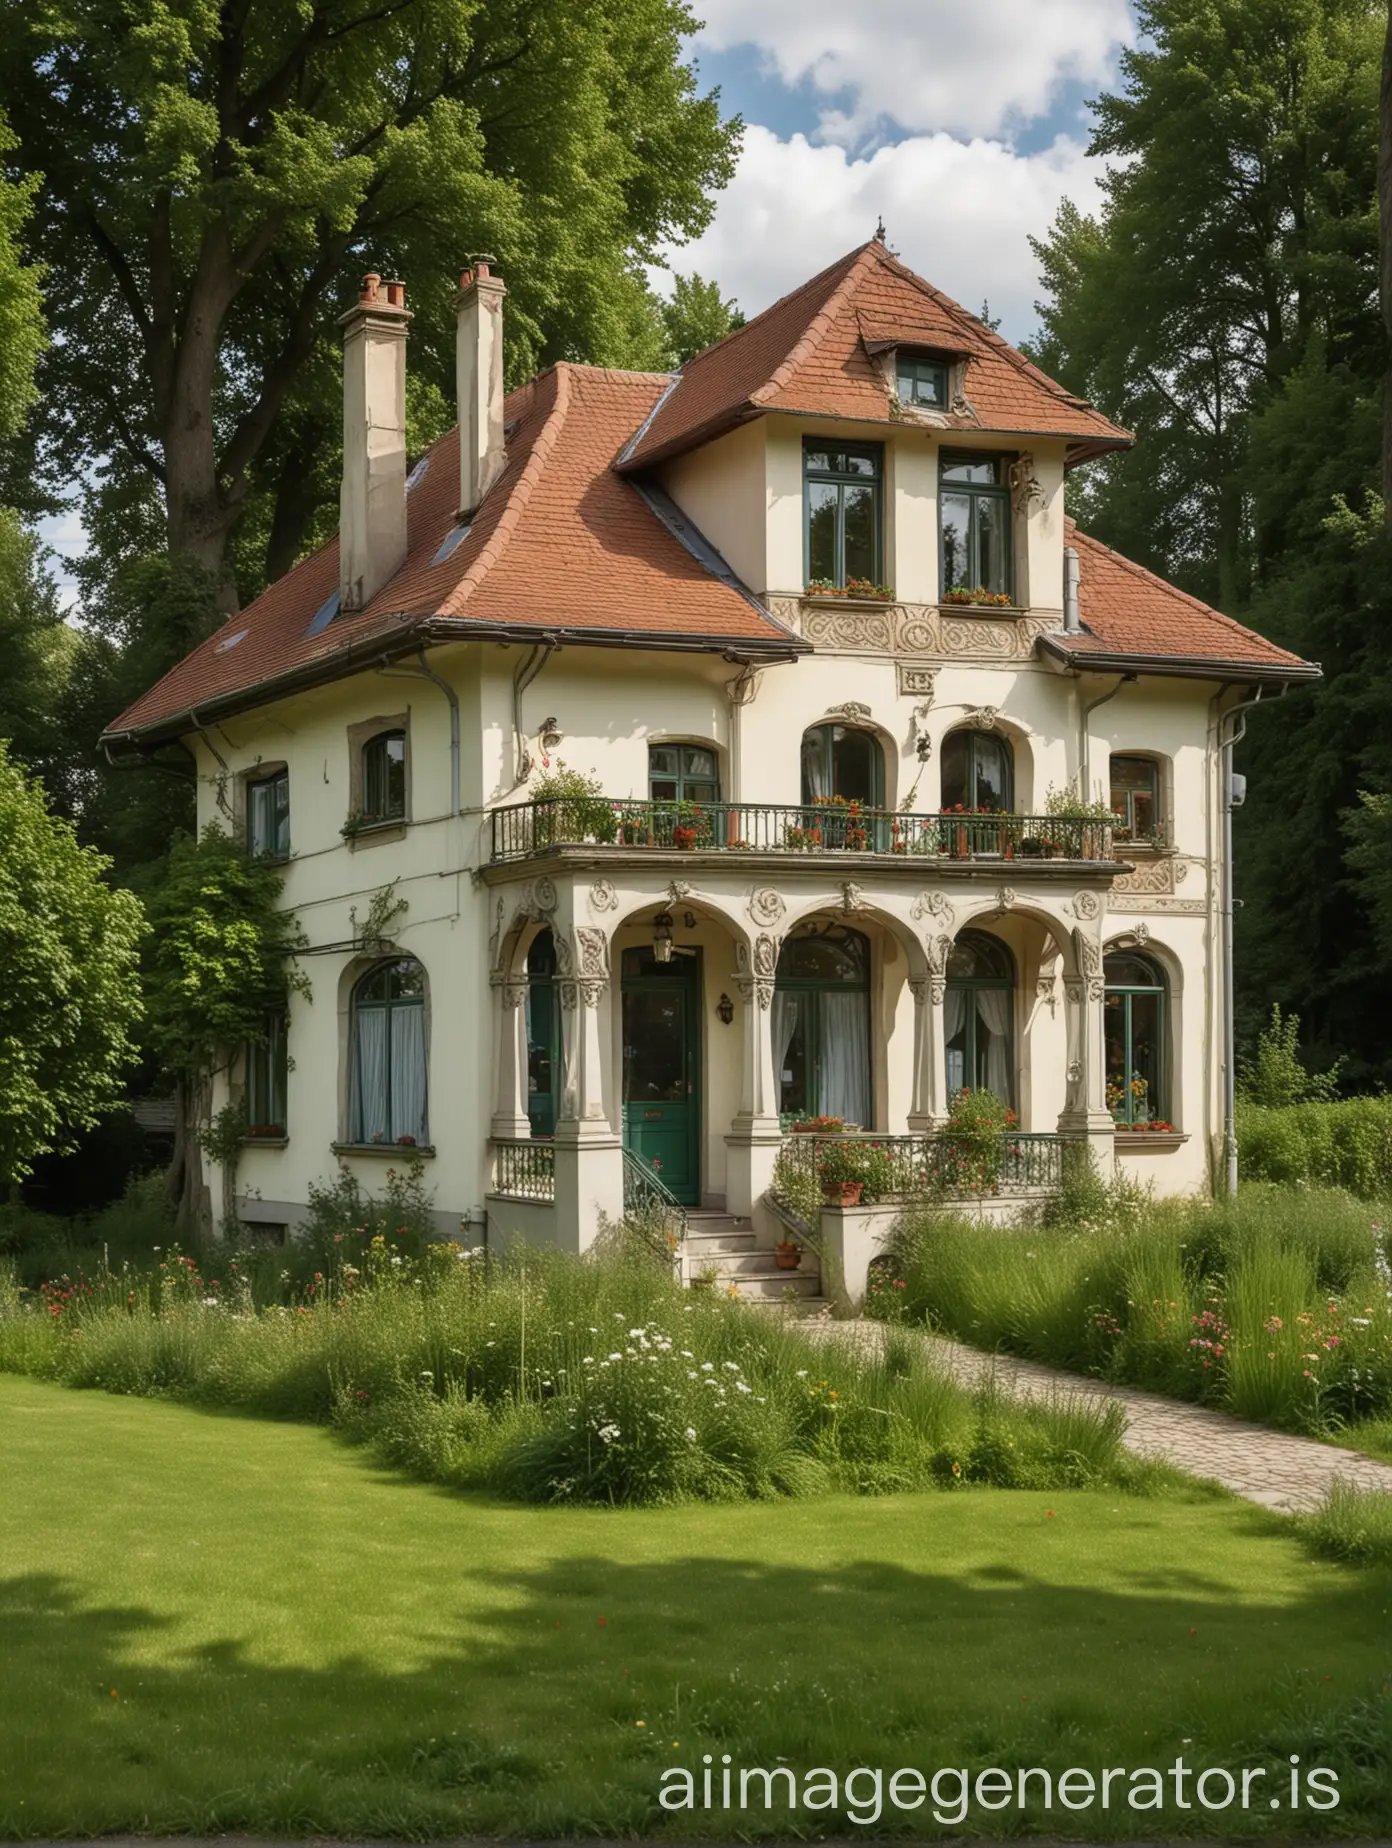 Art-Nouveau-Small-Comfortable-House-Surrounded-by-Meadows